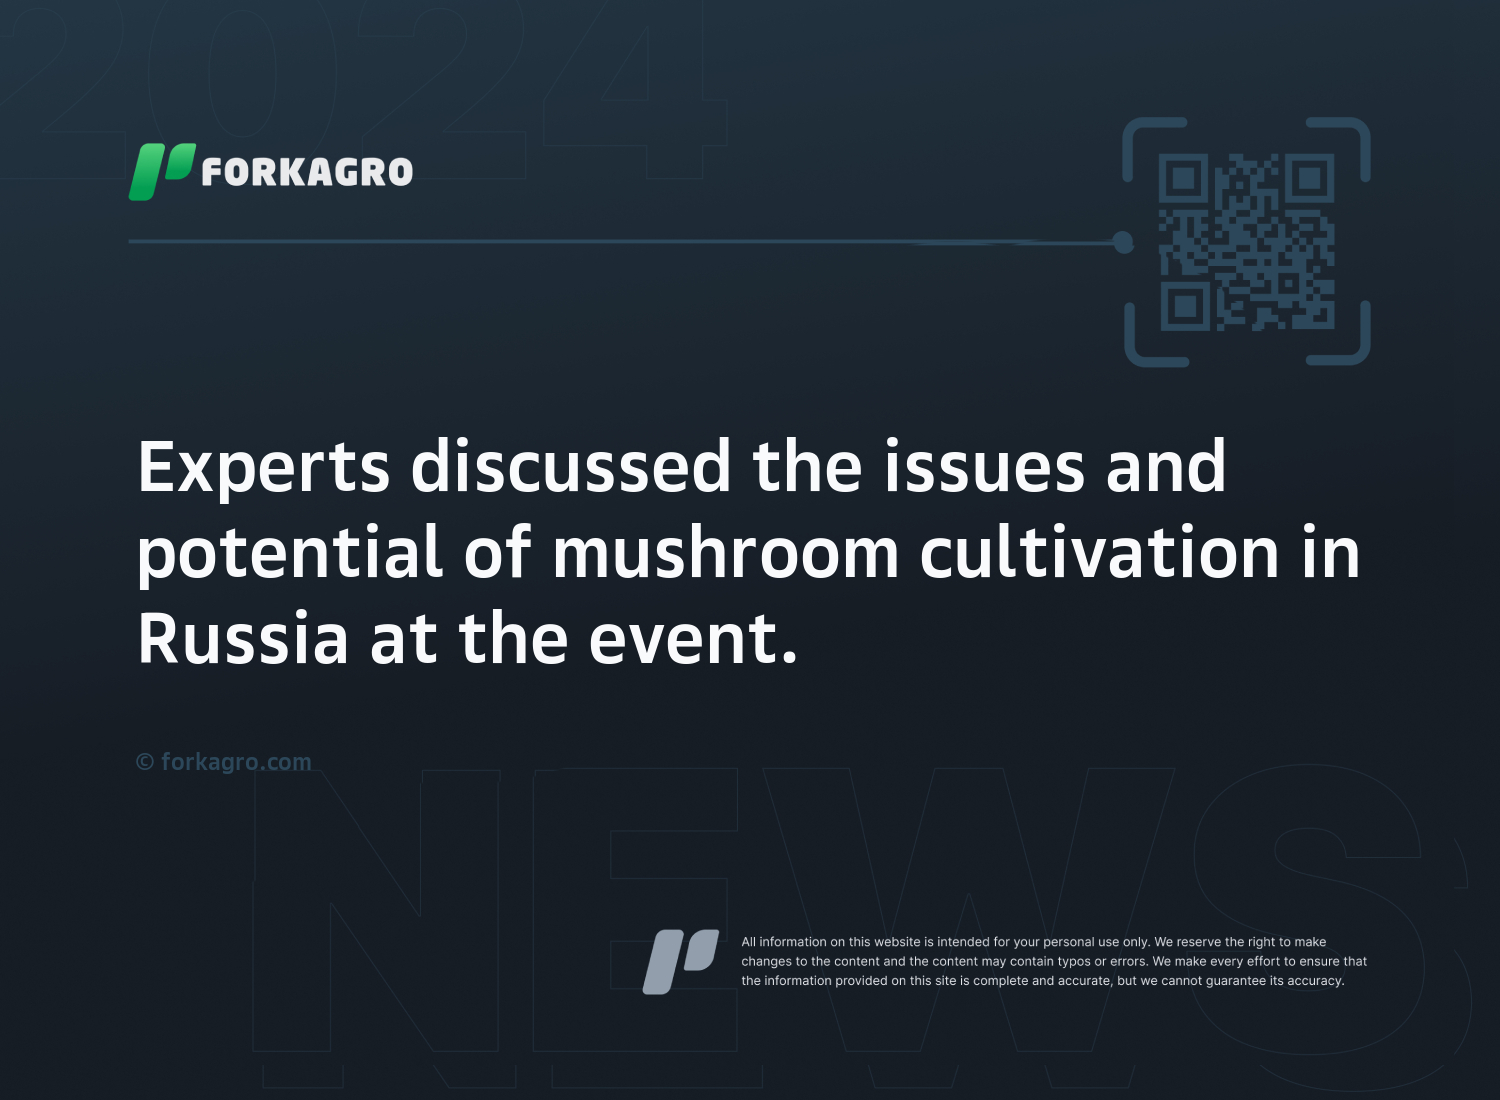 Experts discussed the issues and potential of mushroom cultivation in Russia at the event.